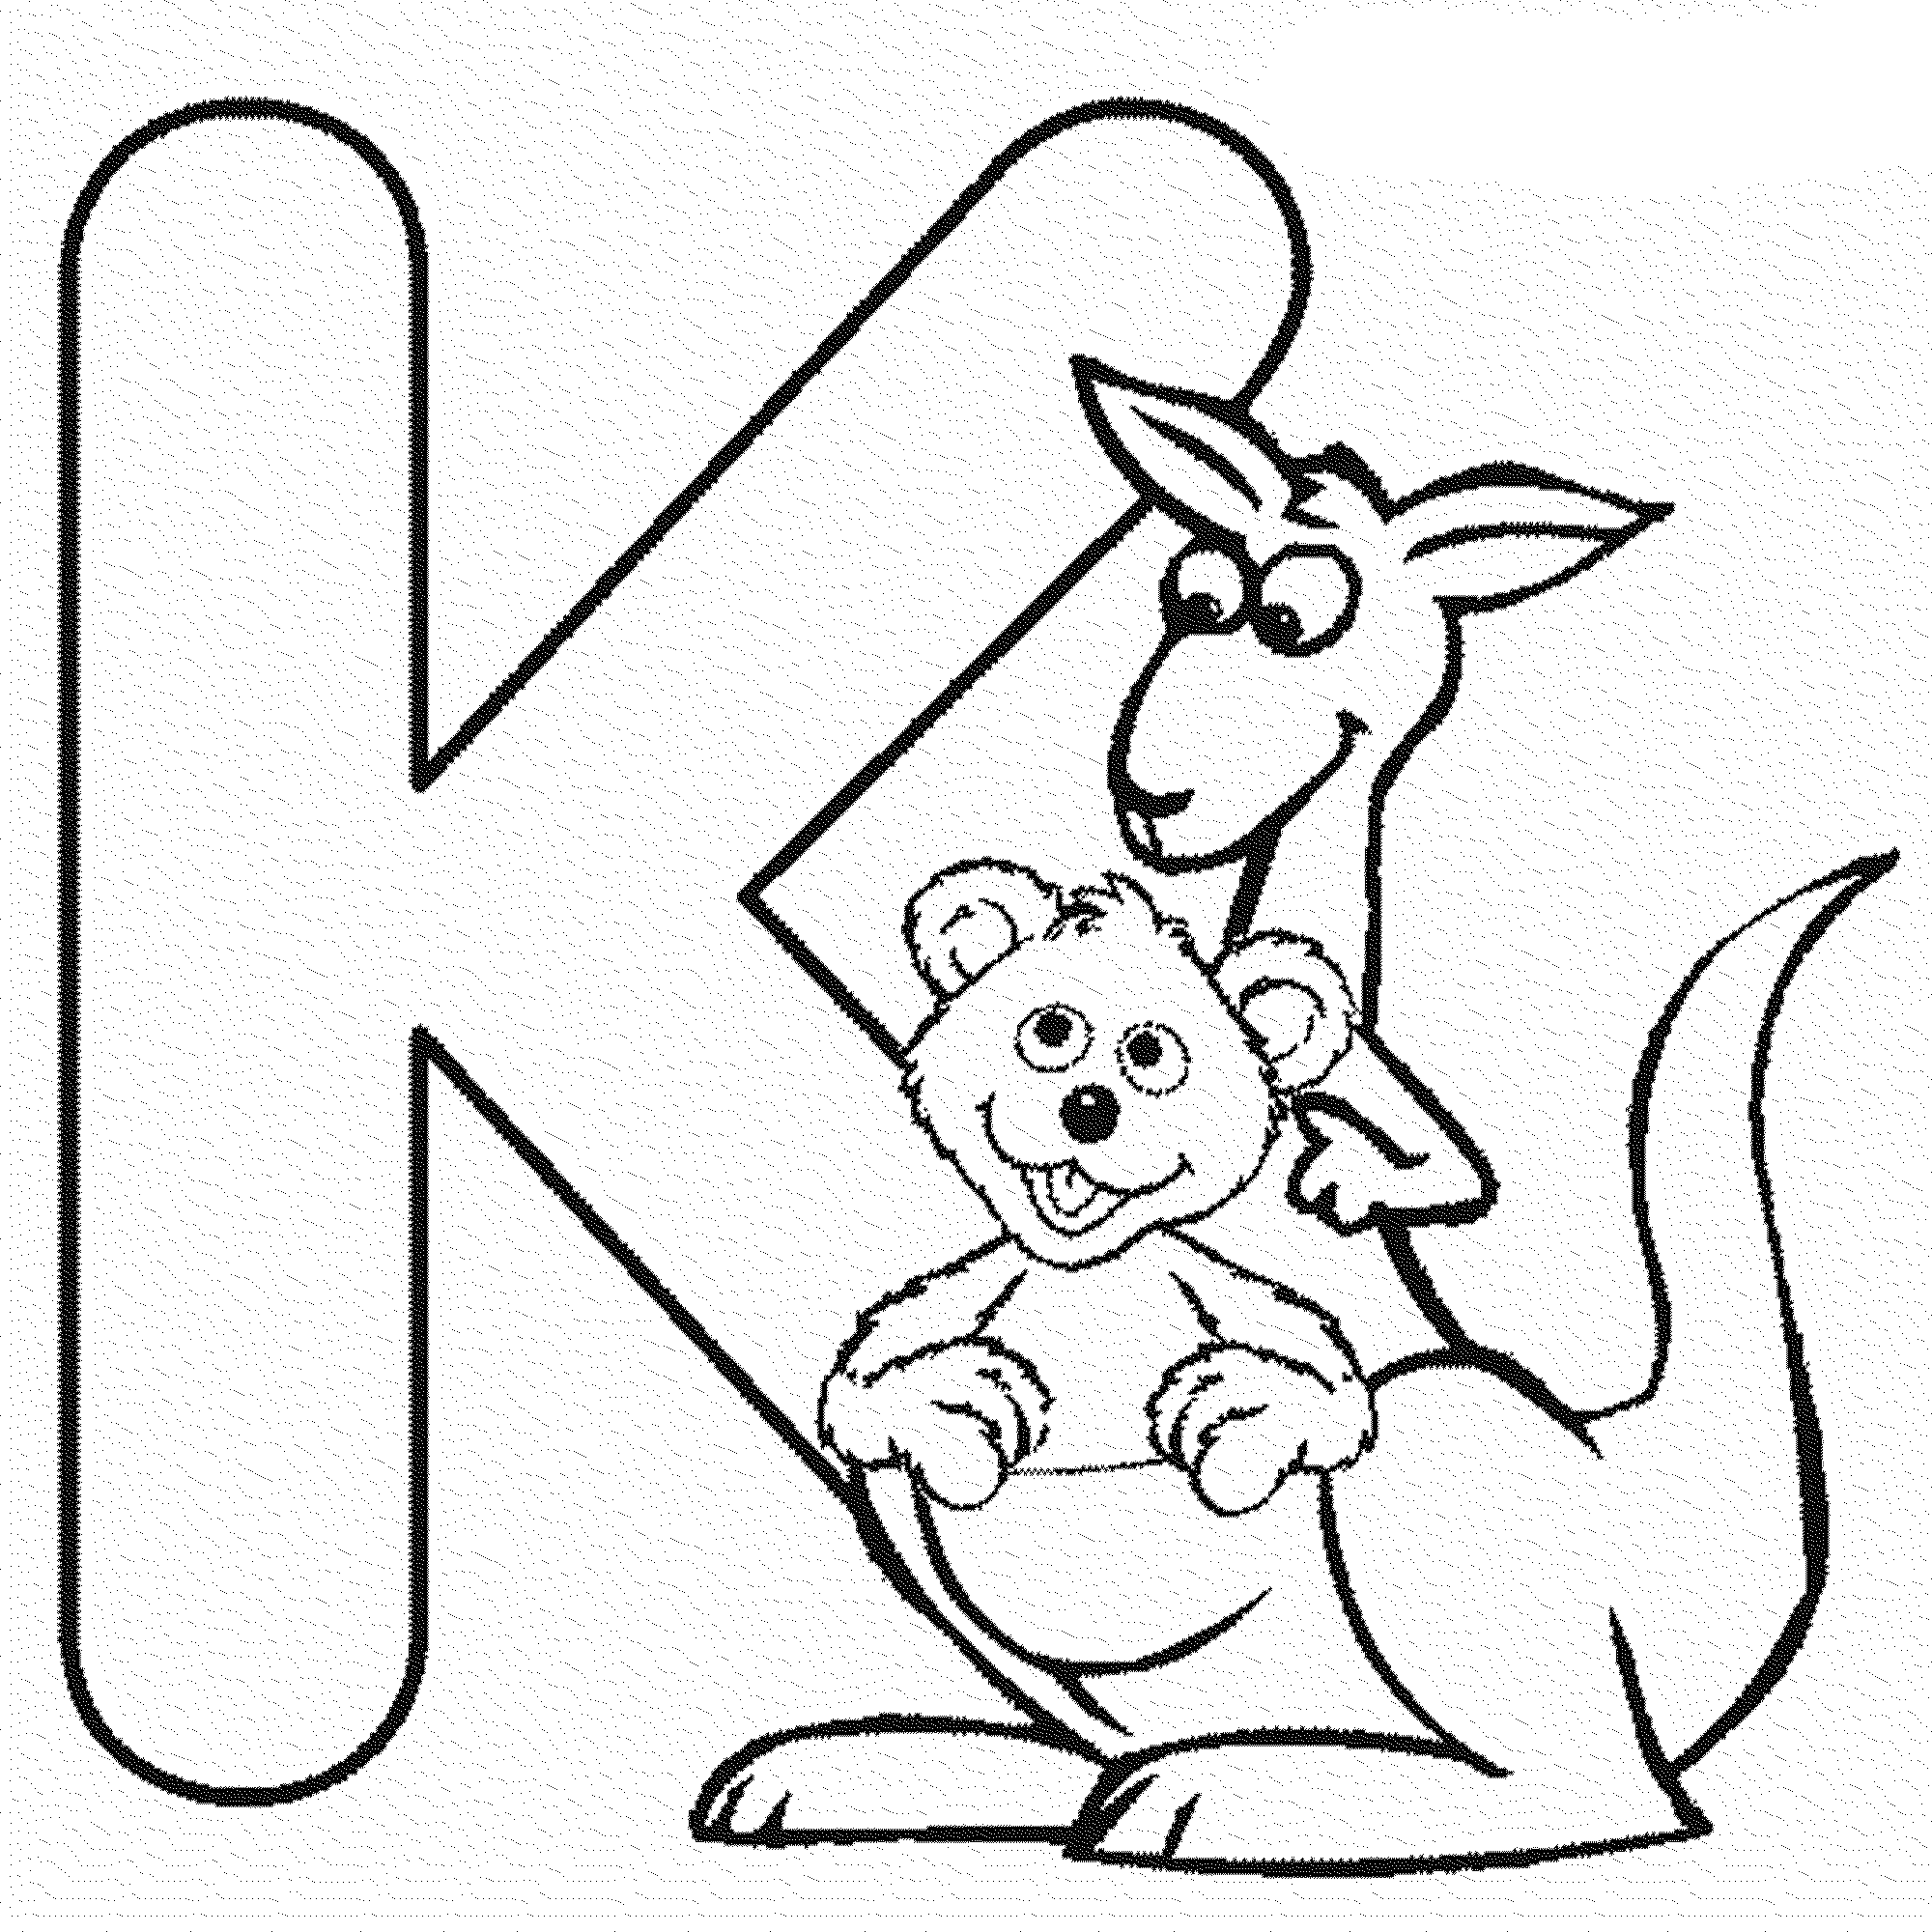 Elmo Coloring Pages Letter K - High Quality Coloring Pages